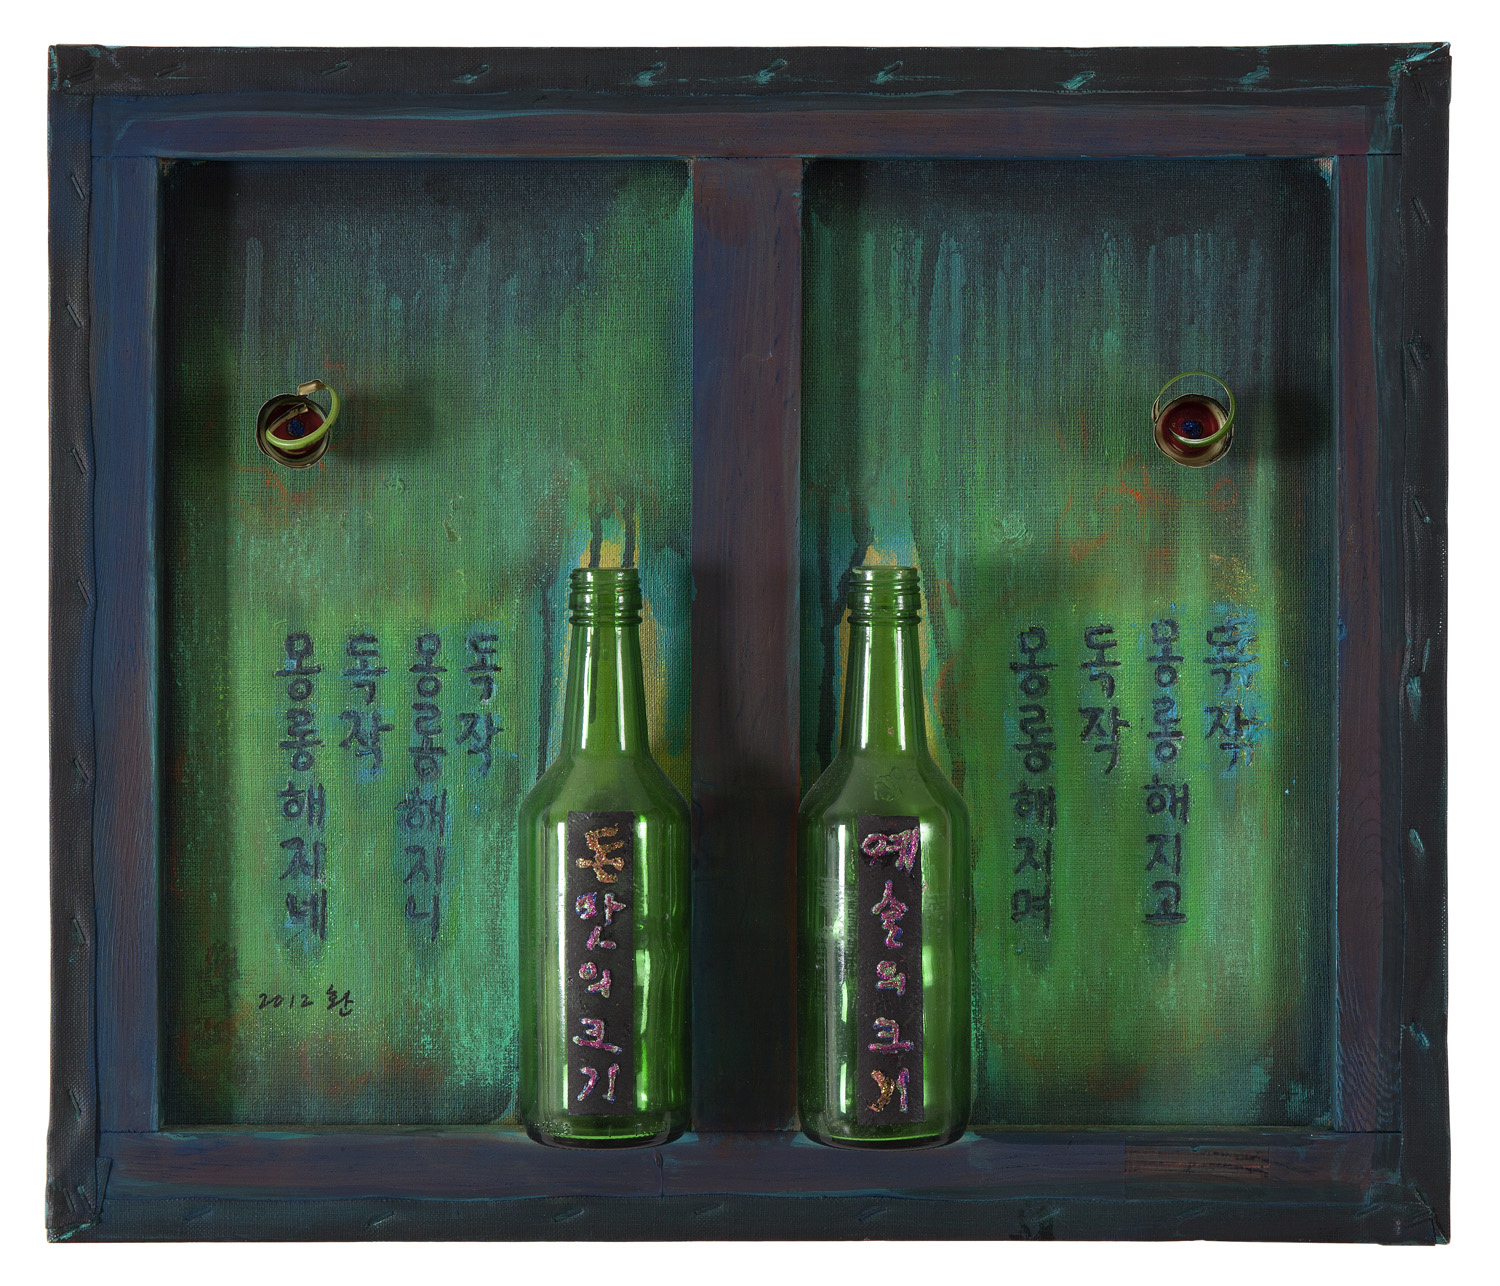 Drink Alone, 2012, Oil and two soju bottles on canvas, 45x53x6cm